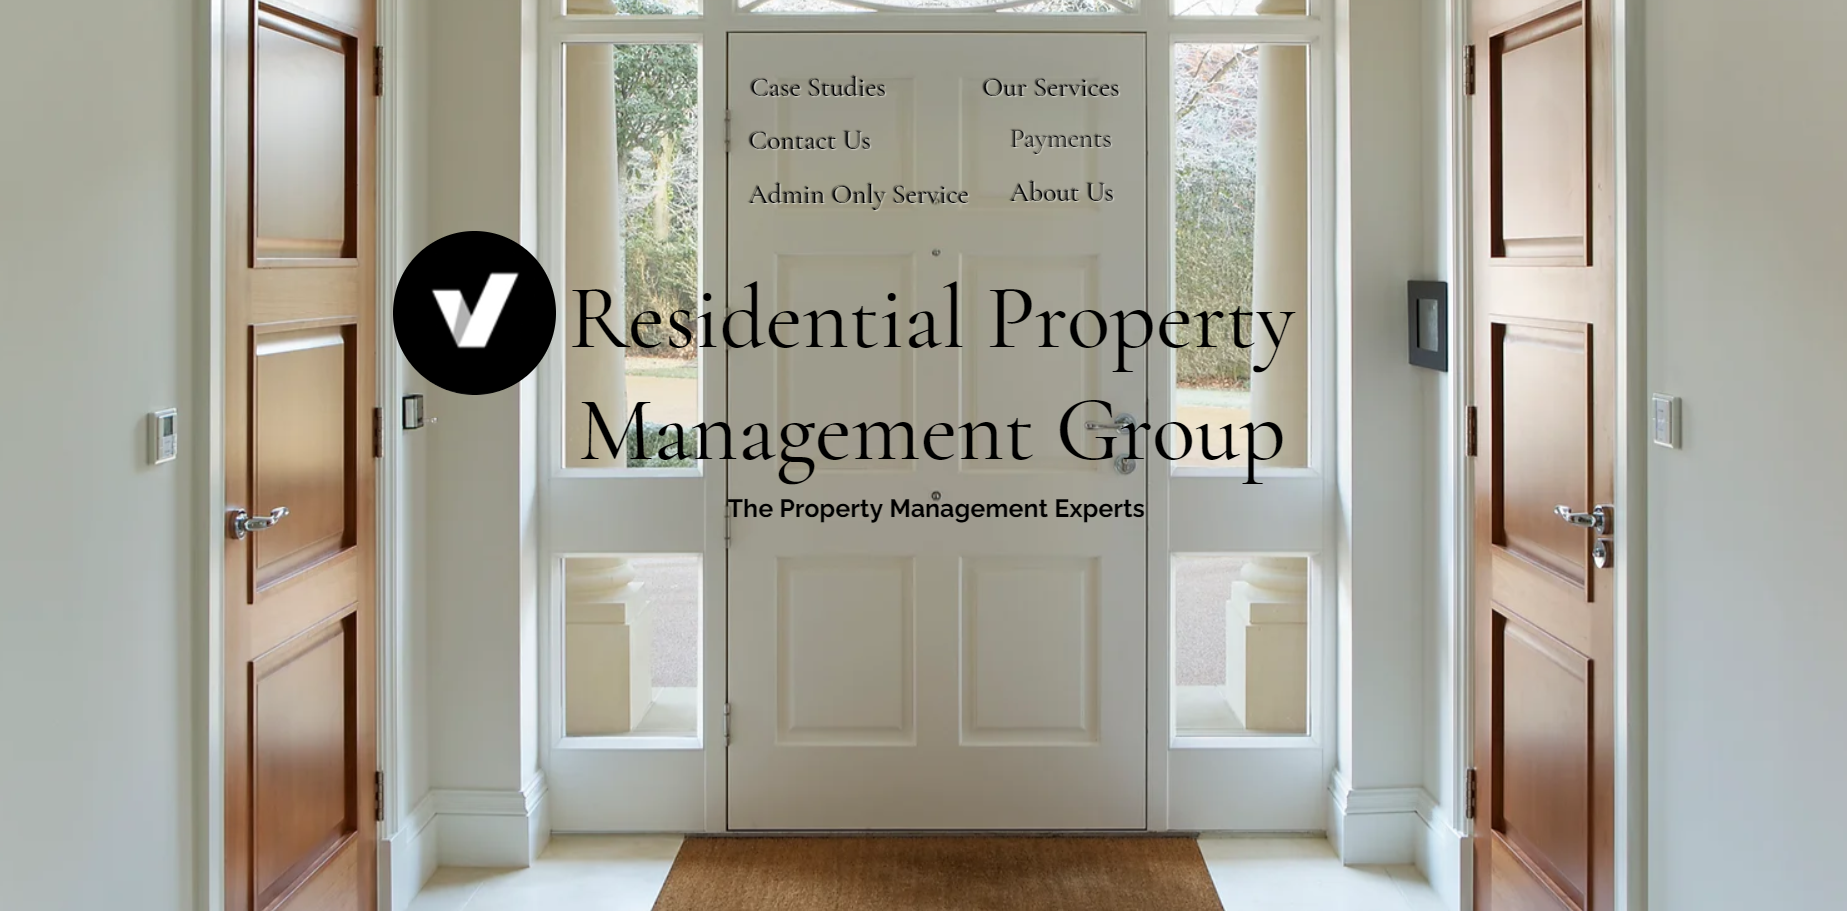 Residential Property Management Group